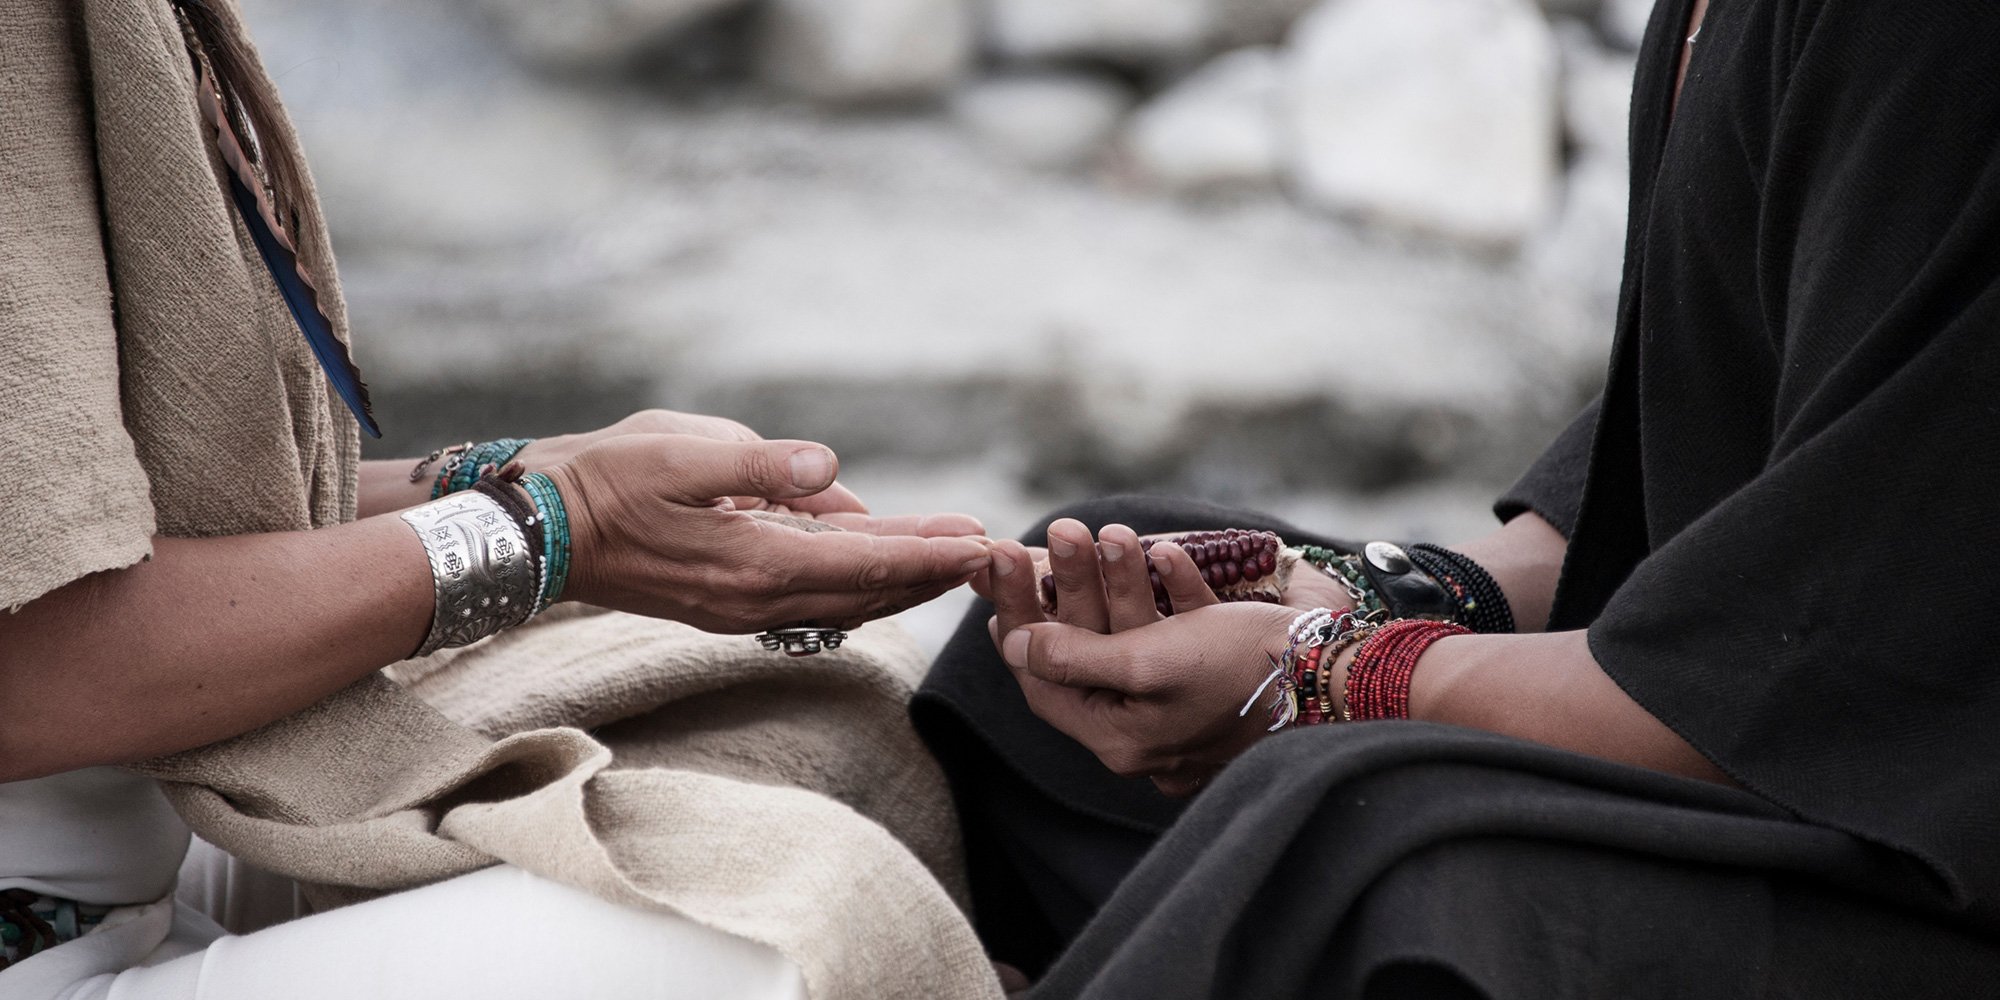 7 Tips on Building Relationships with Indigenous Peoples